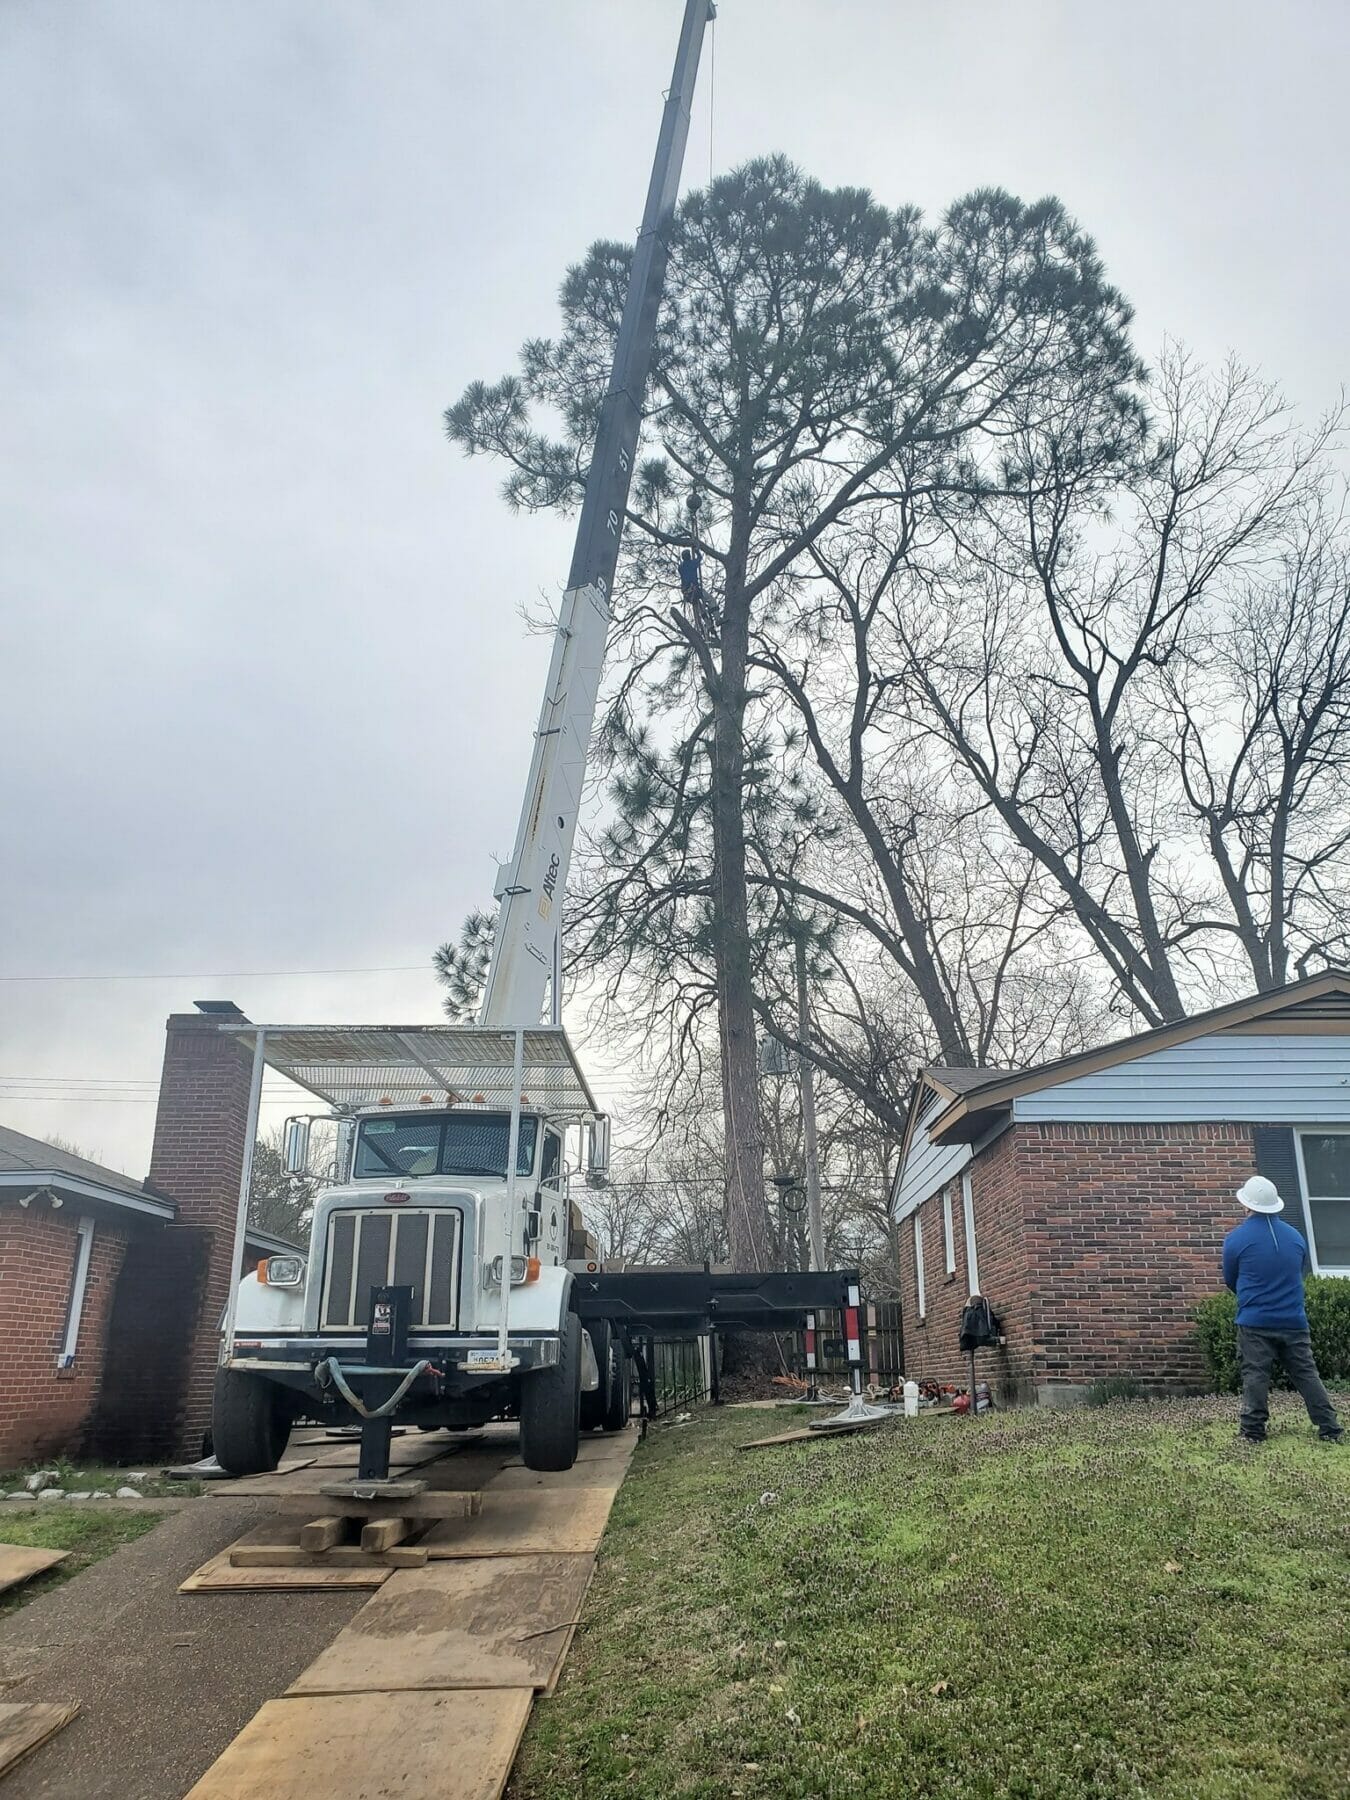 Large crane to help with tree removal